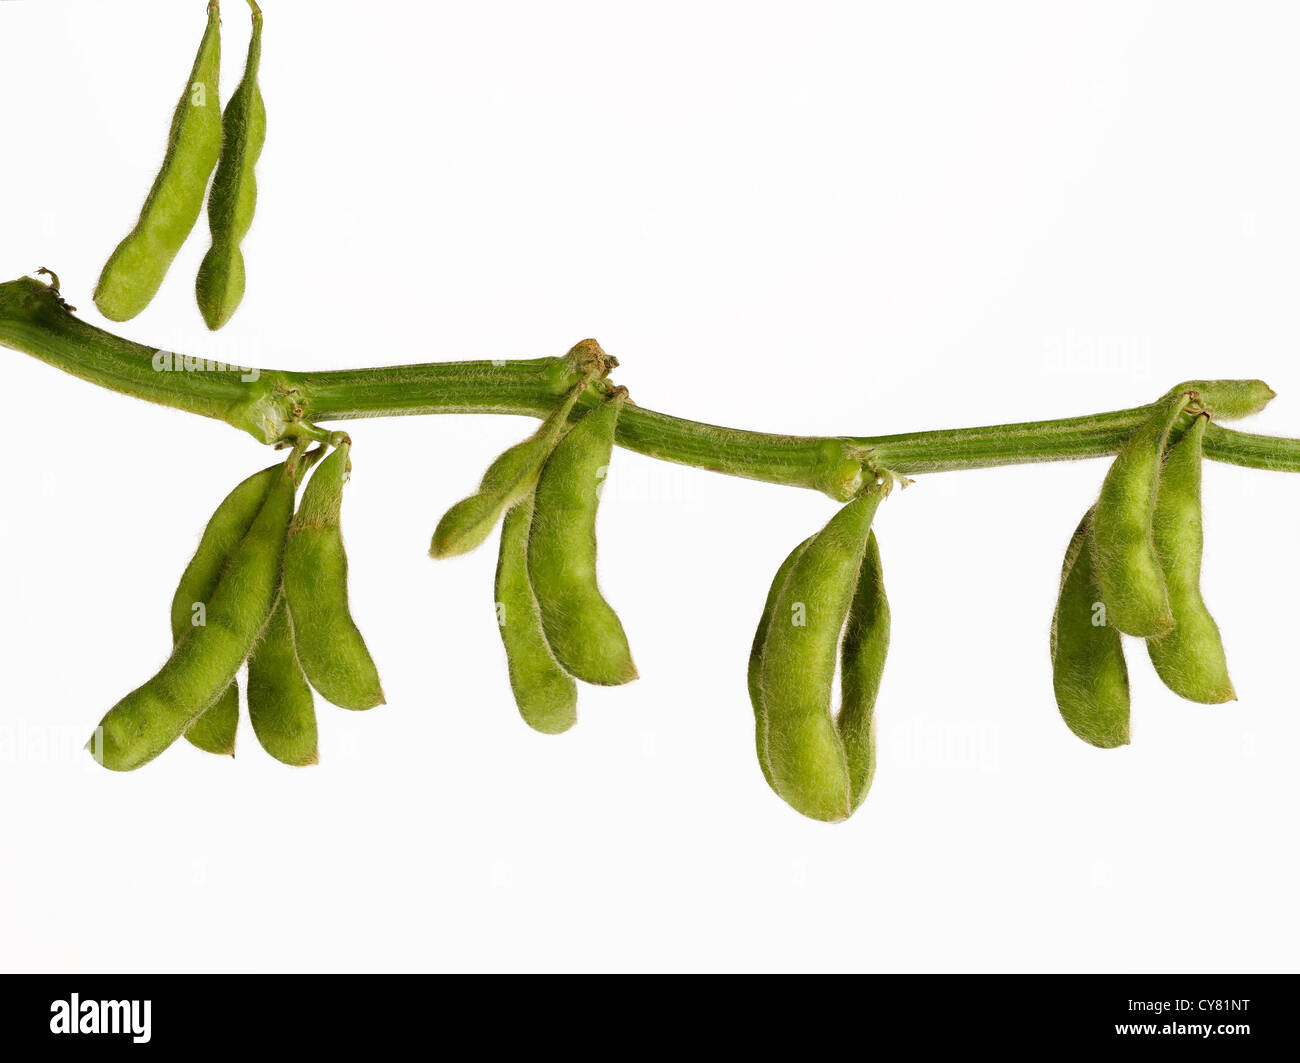 Soybean Pods Hanging on Branch Stock Photo